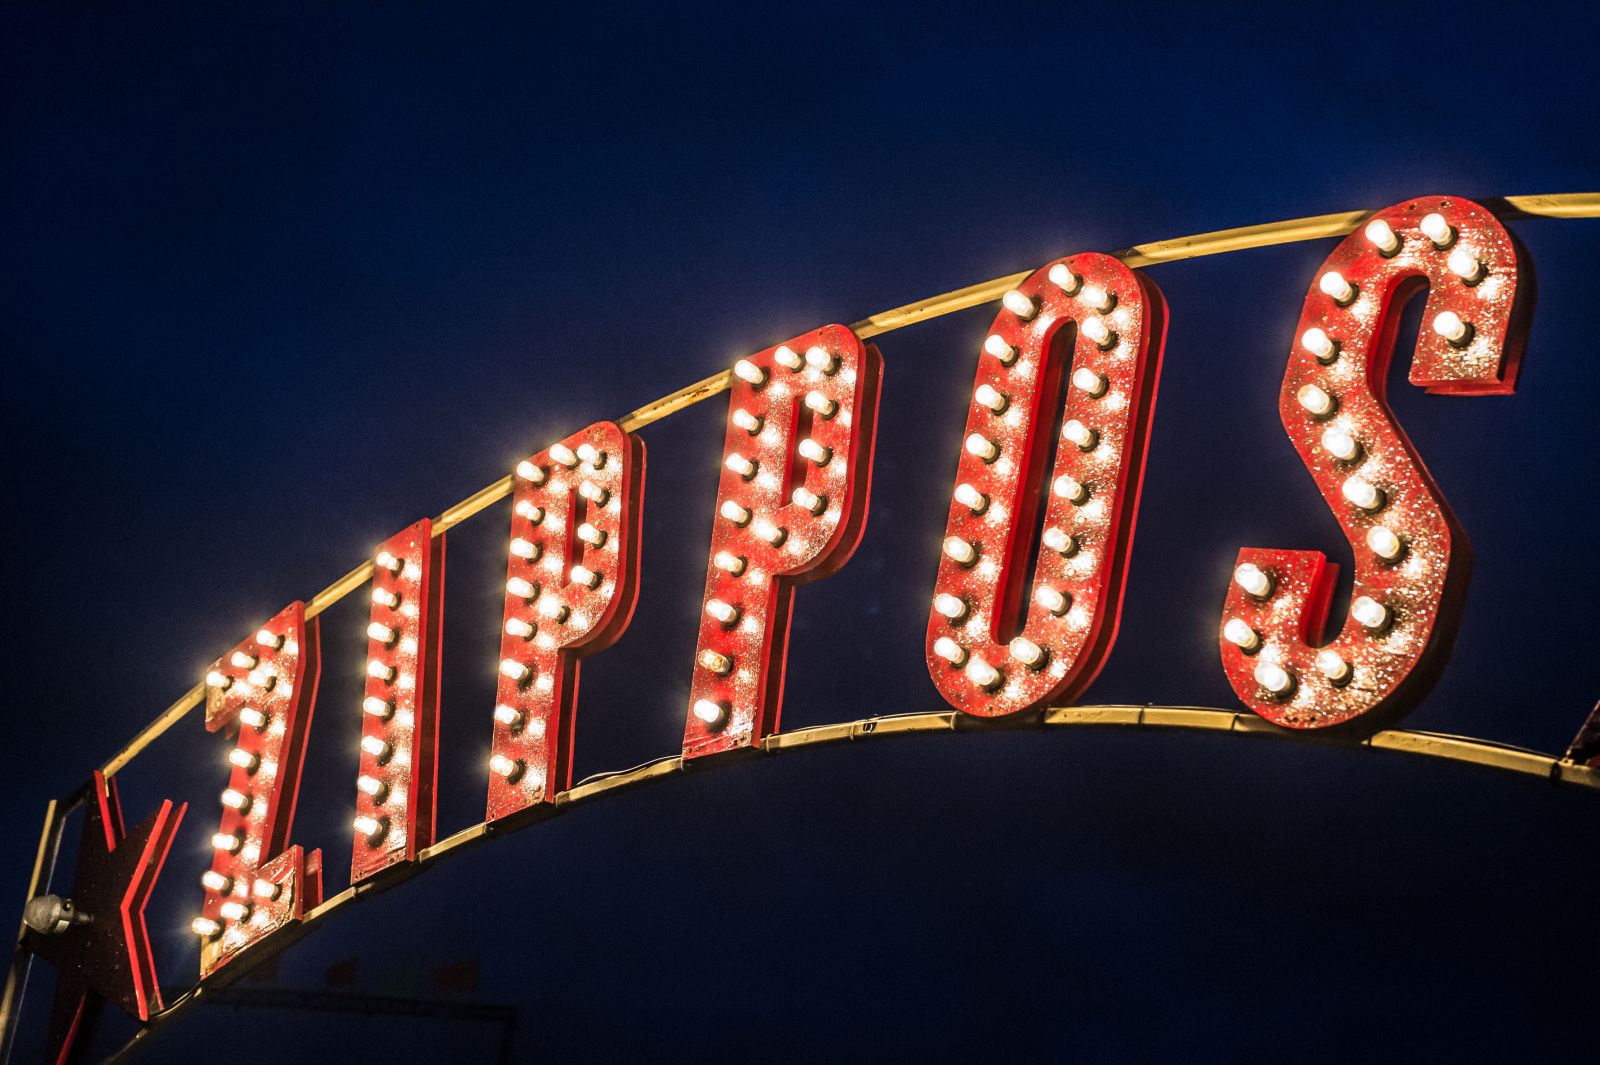 Zippos Circus Lights (Please credit photographer Piet-Hein Out)